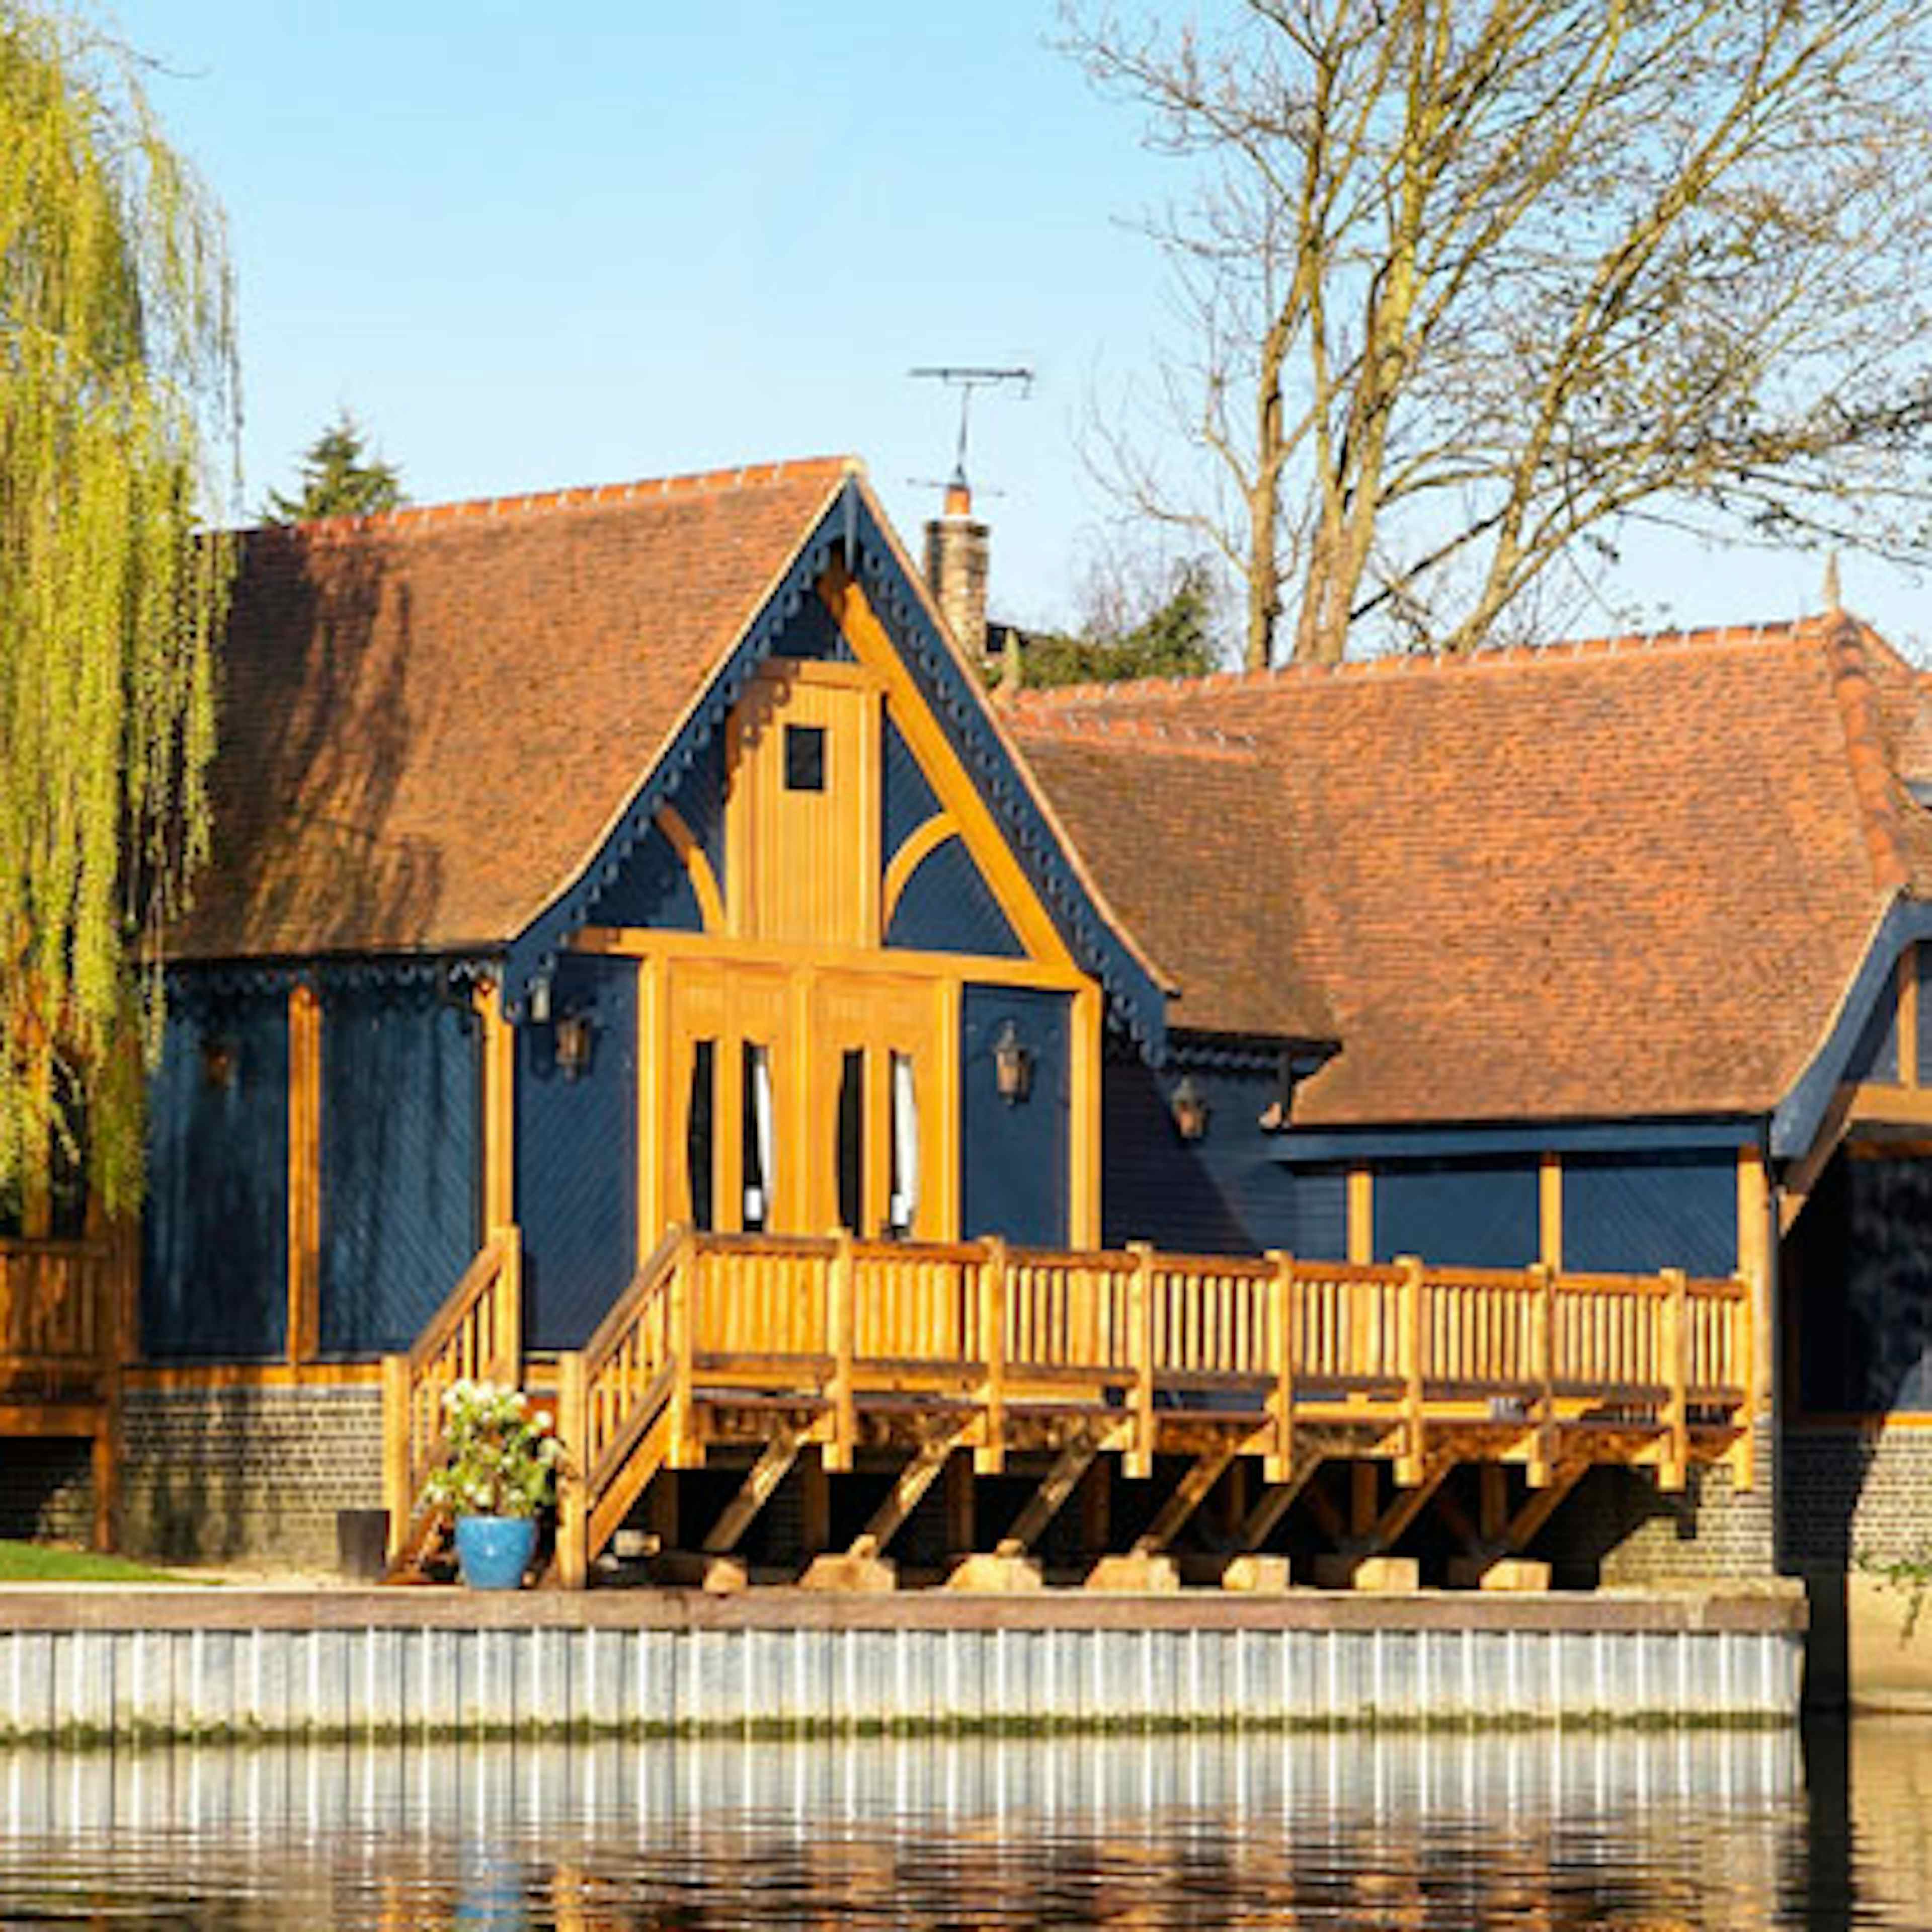 The Oakley Court  - The Boathouse image 2